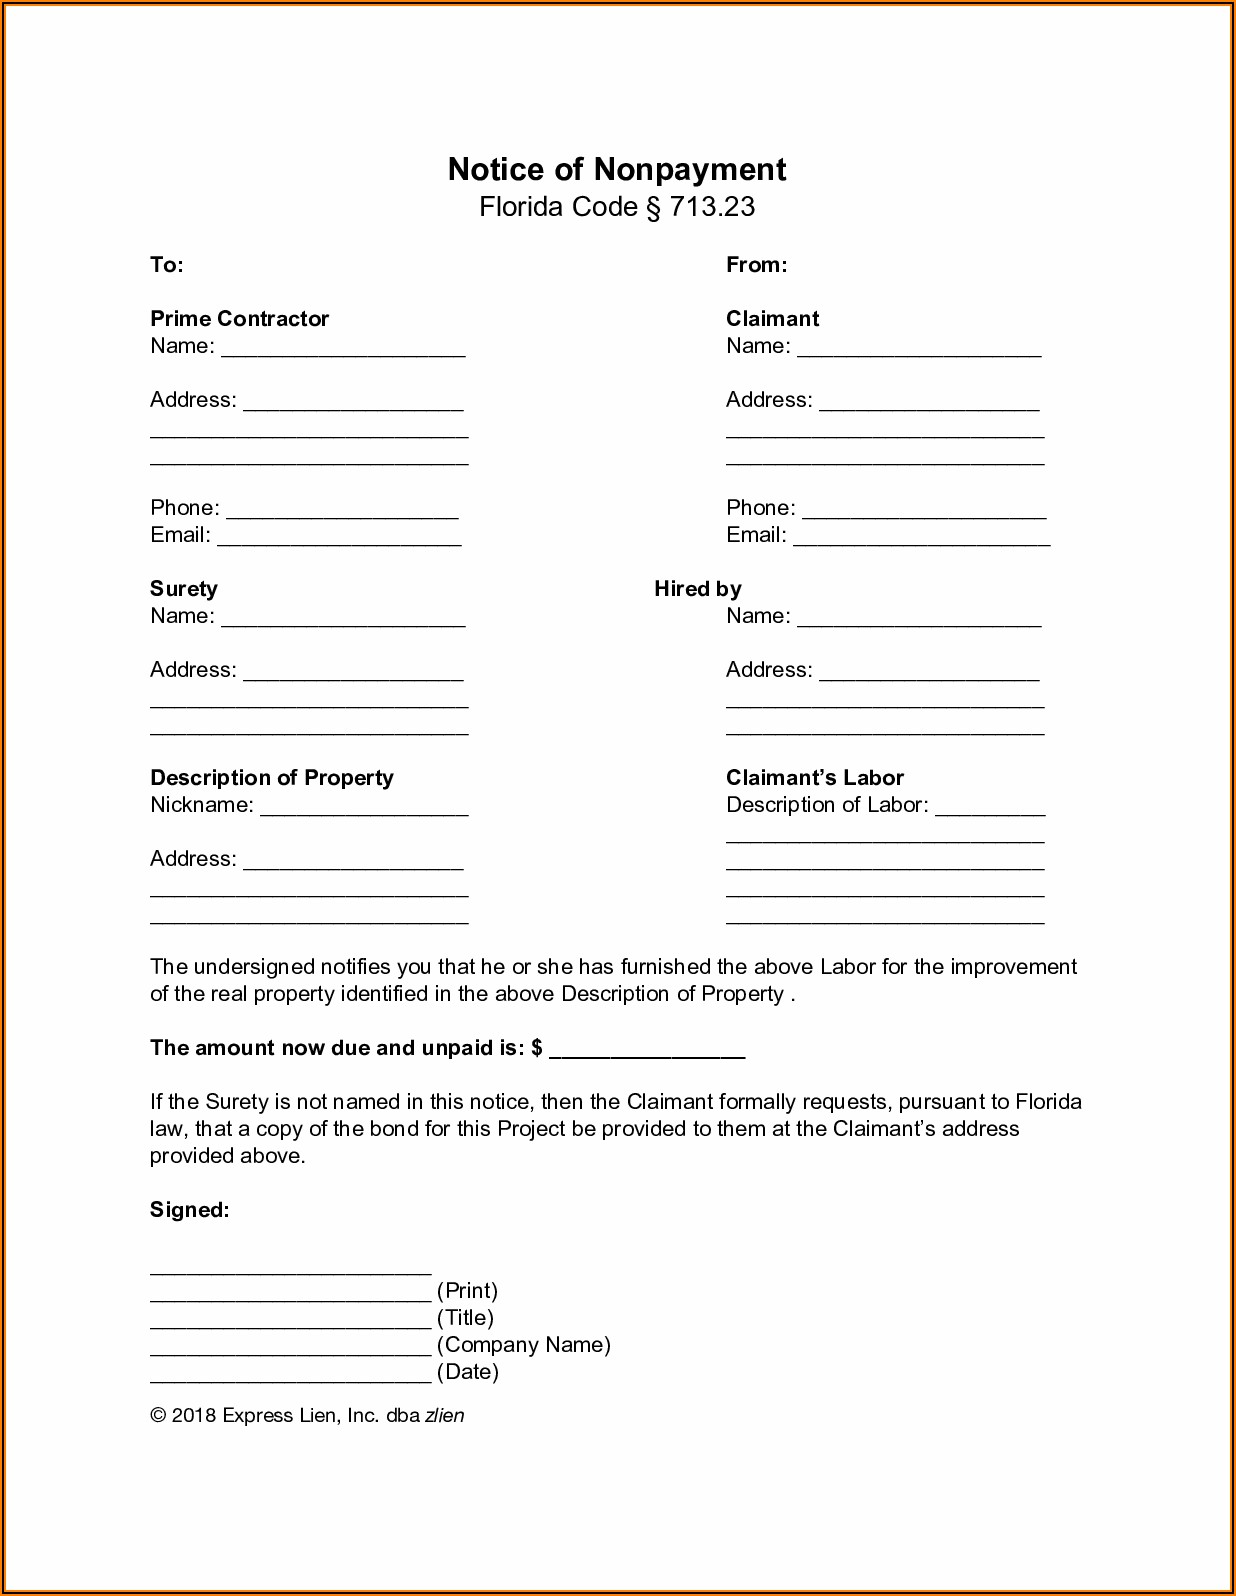 Broward County Probate Court Forms Form Resume Examples A19XBQRJV4